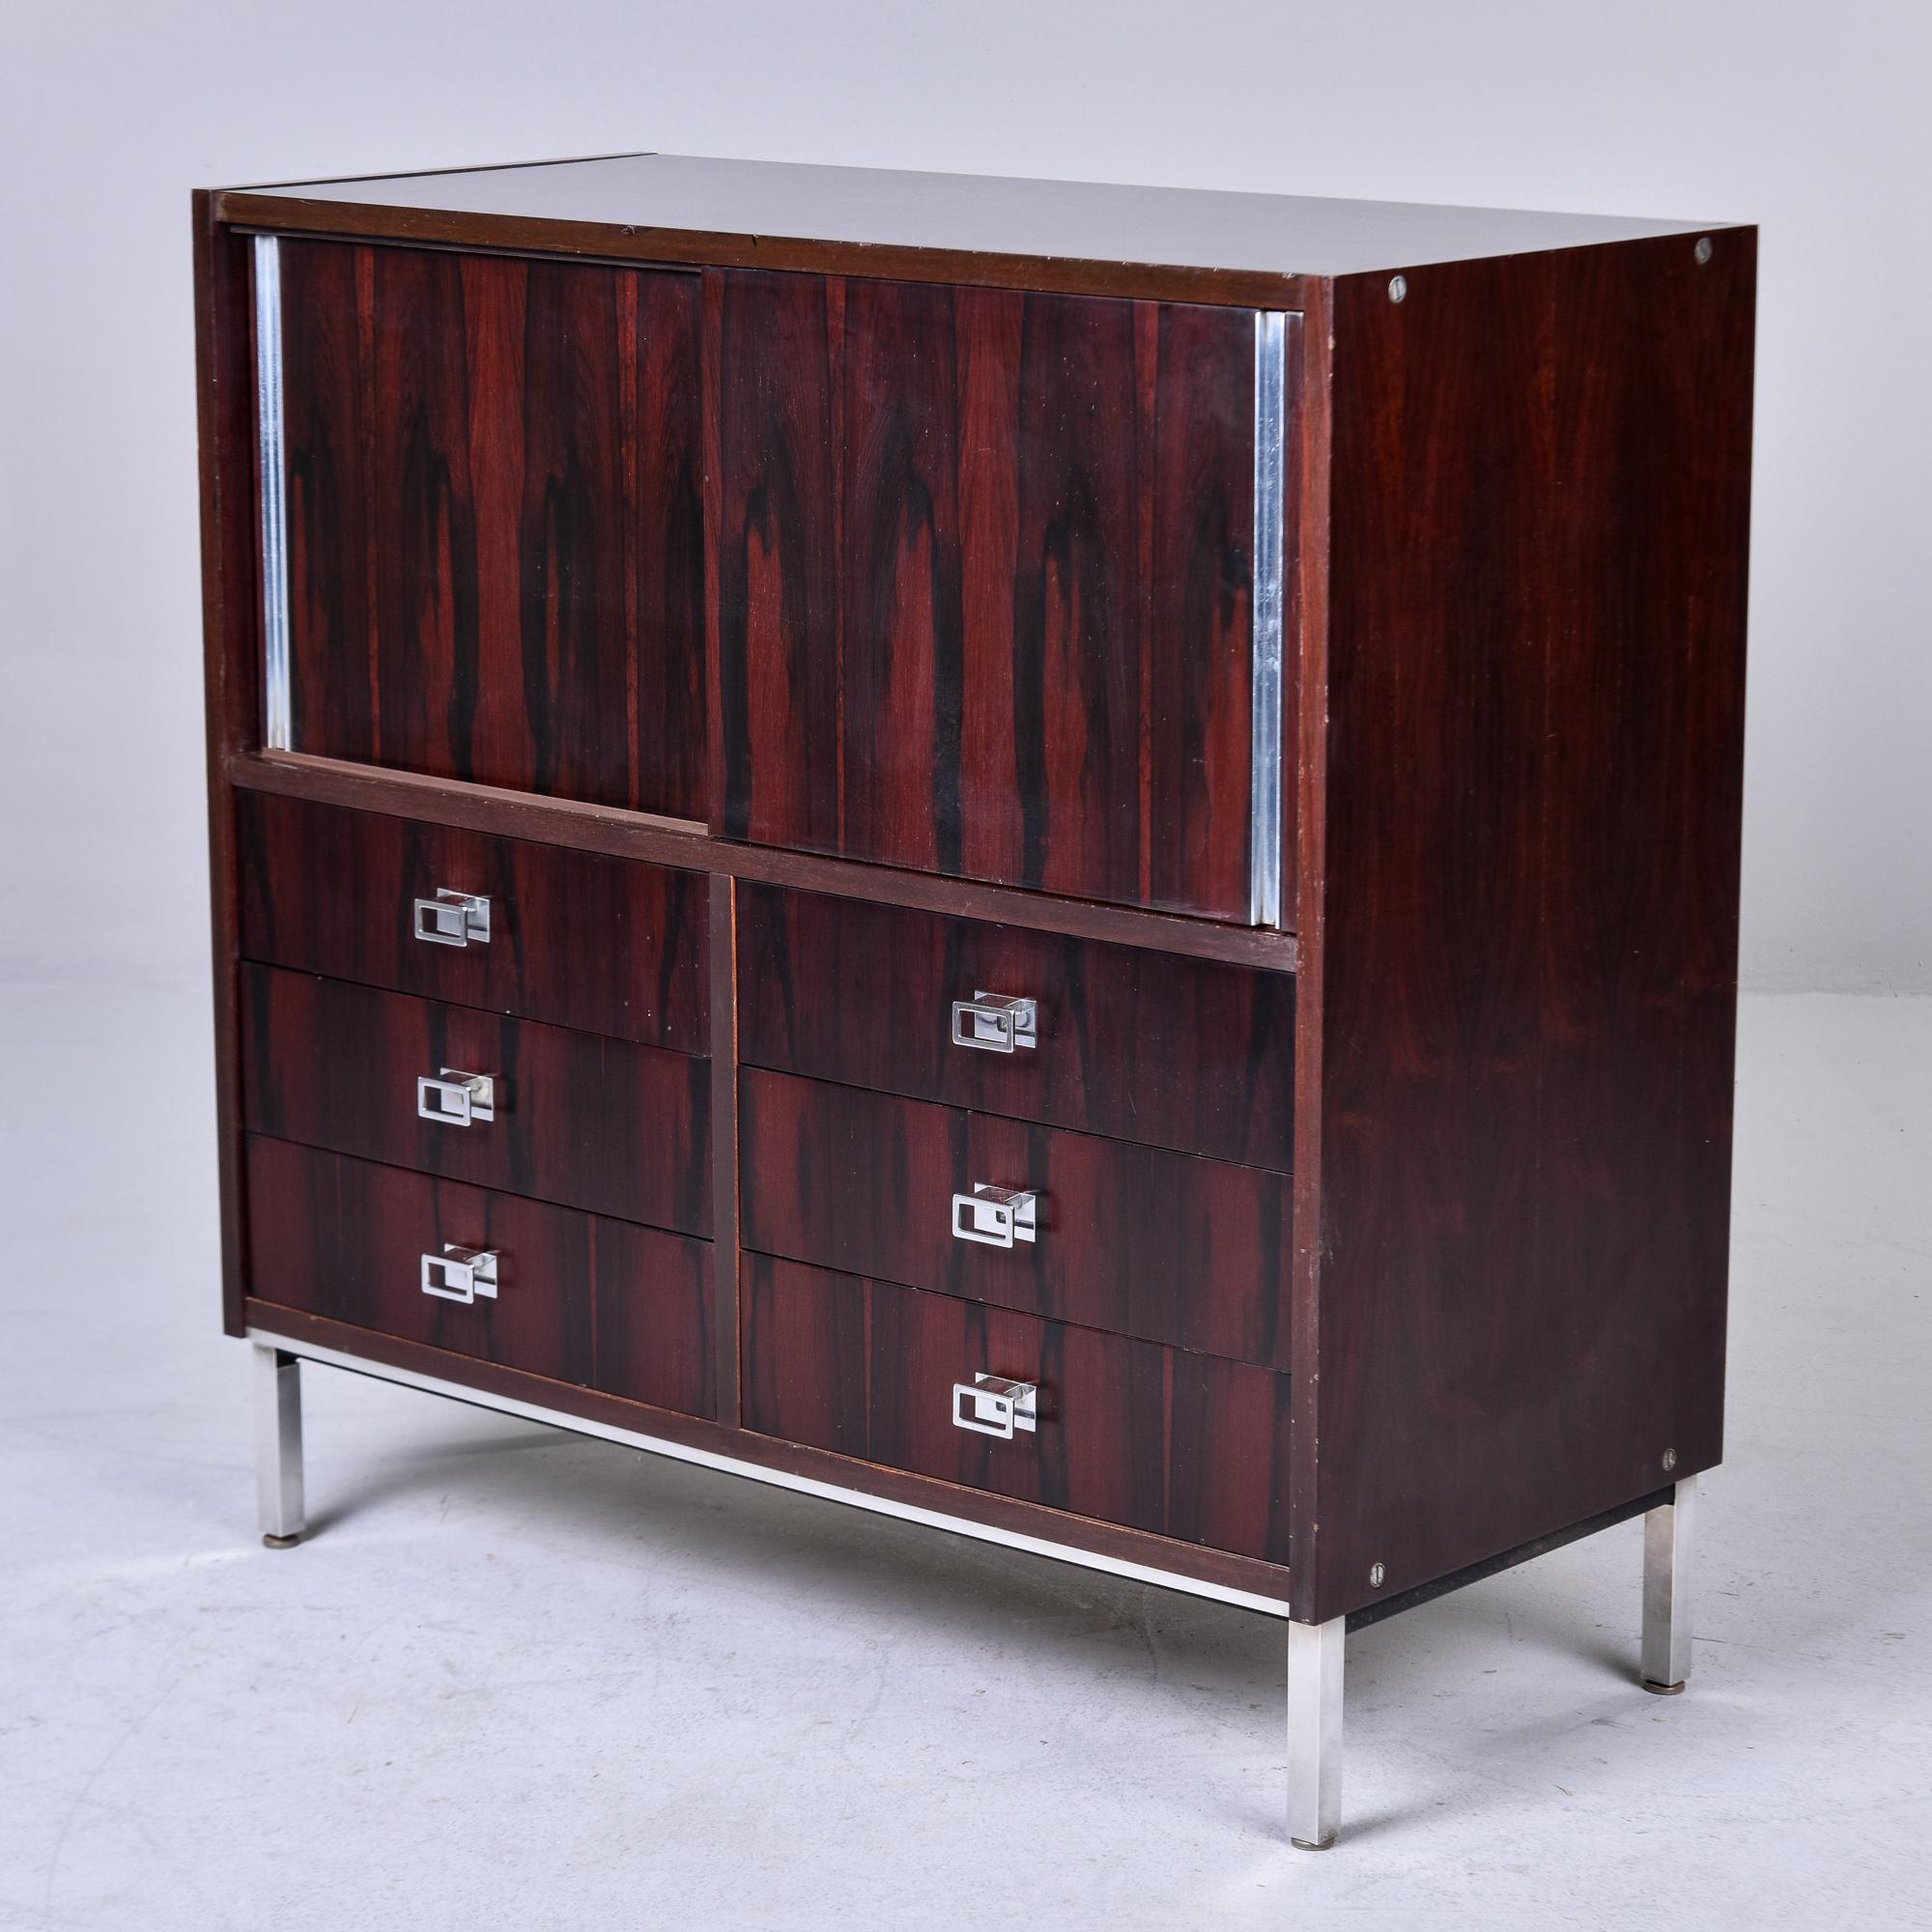 Found in Italy, this circa 1960s cabinet by Mim of Italy has a chrome base and legs supporting a rosewood cabinet. Cabinet consists of wood with rosewood veneer. Top section of cabinet has two sliding doors that open to a storage compartment. Bottom